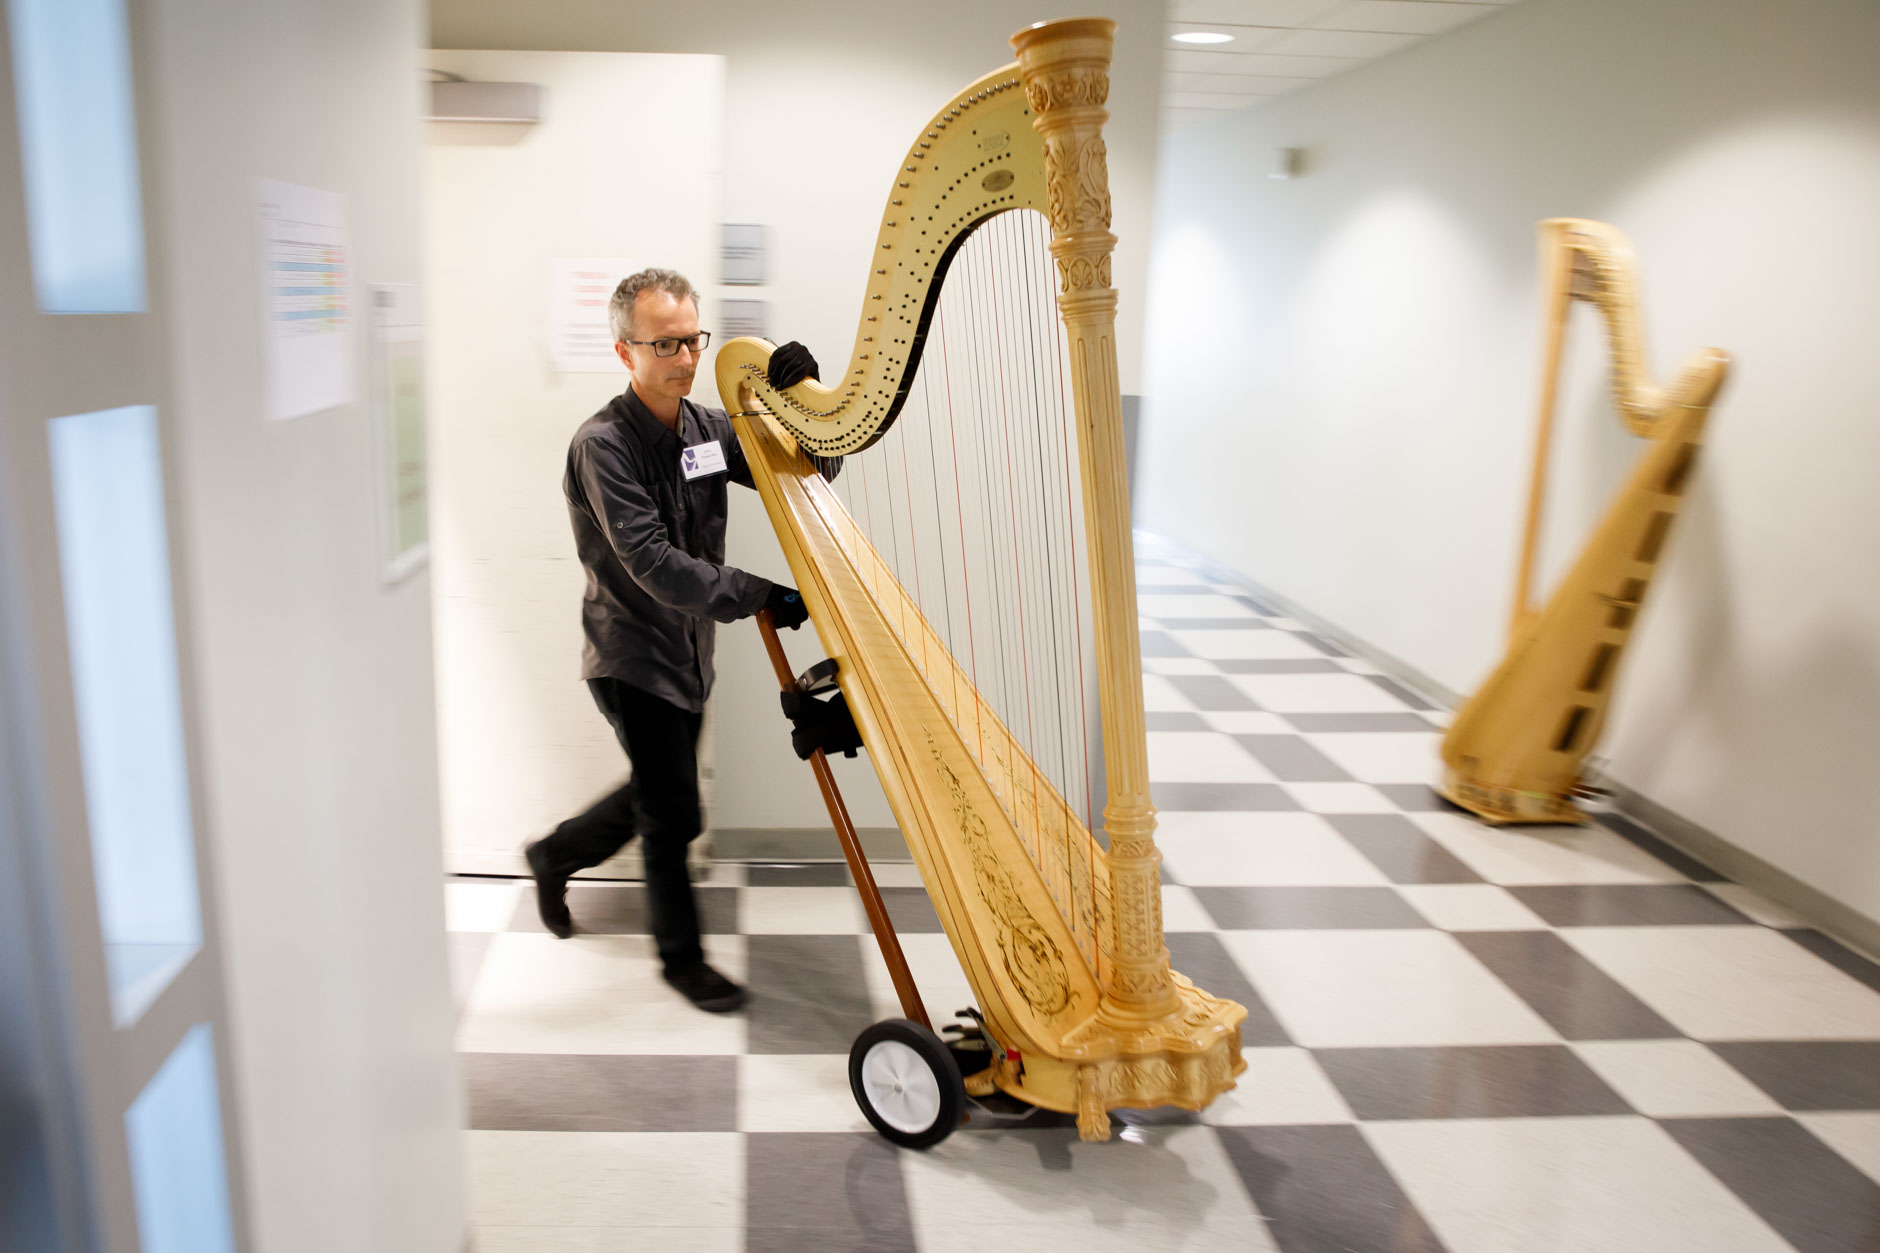 Lyon and Healy Technician John Papadolias moves a harp from a practice room to the stage during Stage III at the 11th USA International Harp Competition at Indiana University in Bloomington, Indiana on Wednesday, July 10, 2019. (Photo by James Brosher)